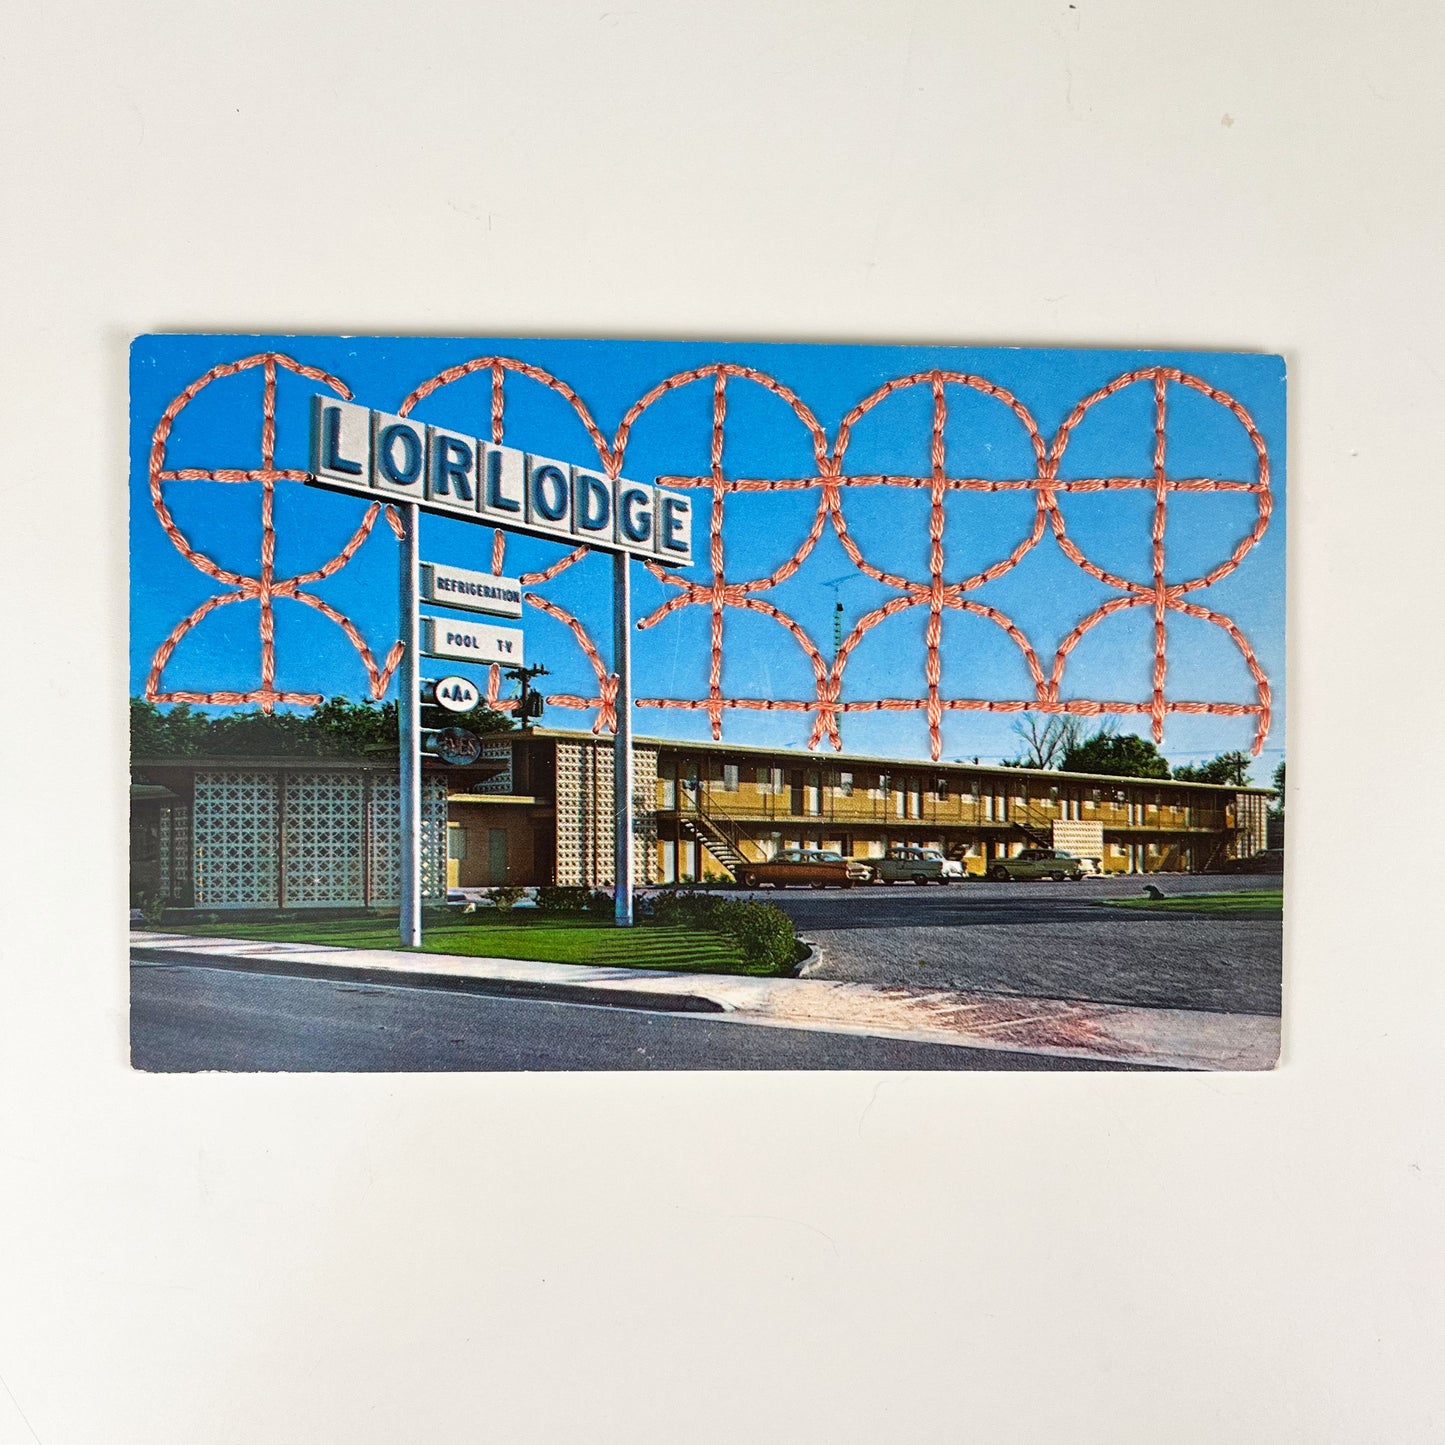 an old postcard of a motel called Lorlodge, with a hand embroidered circle and line design like breeze blocks in peach stitched in the background on the sky only, the postcard is sitting on a white background